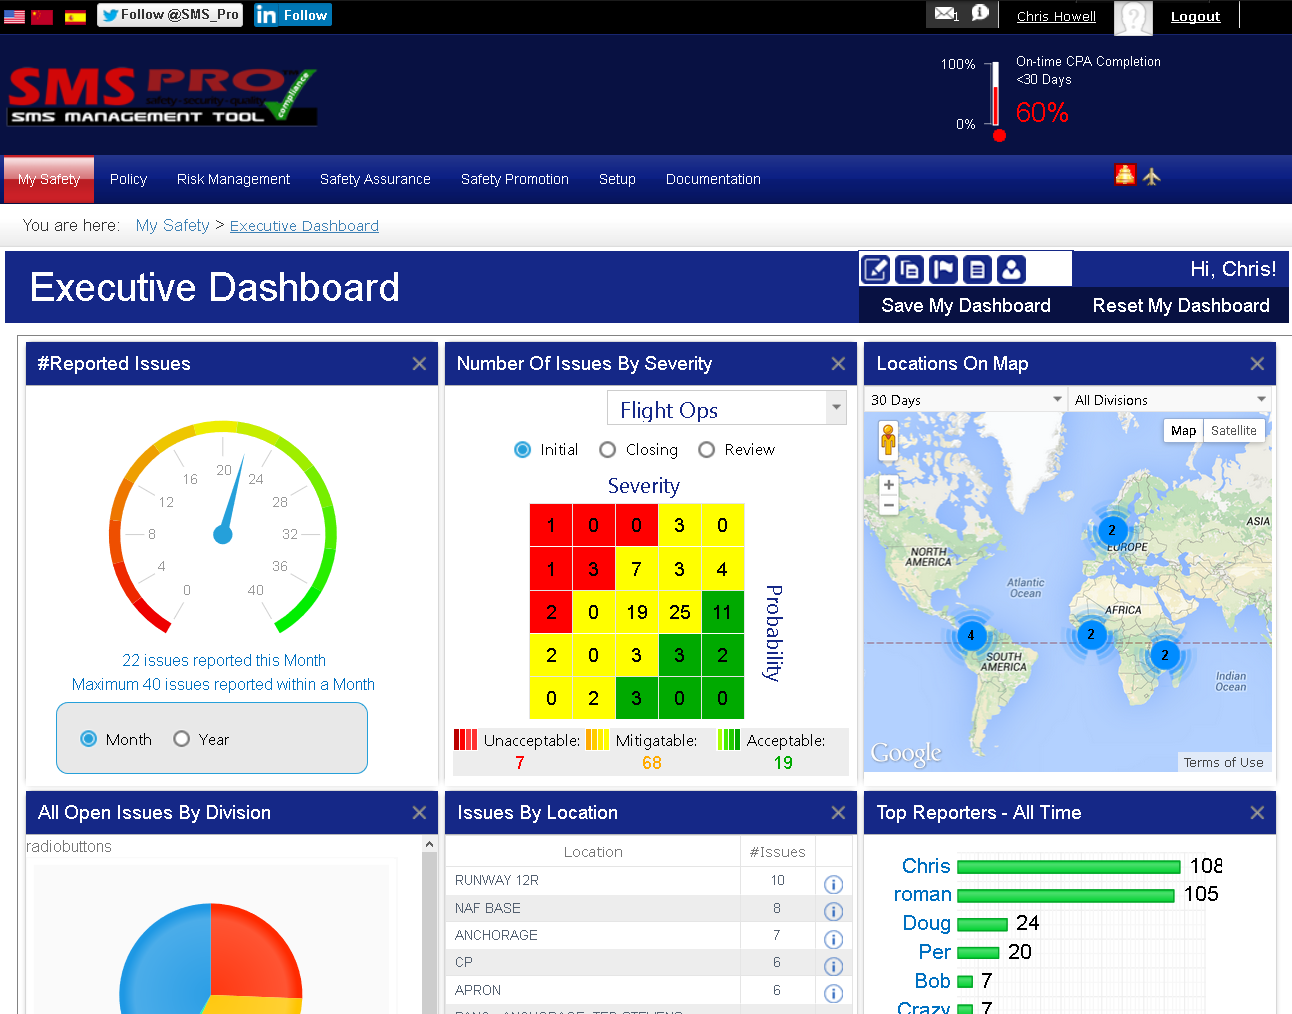 Aviation risk management software allows managers to easily monitor key performance indicators using dashboards